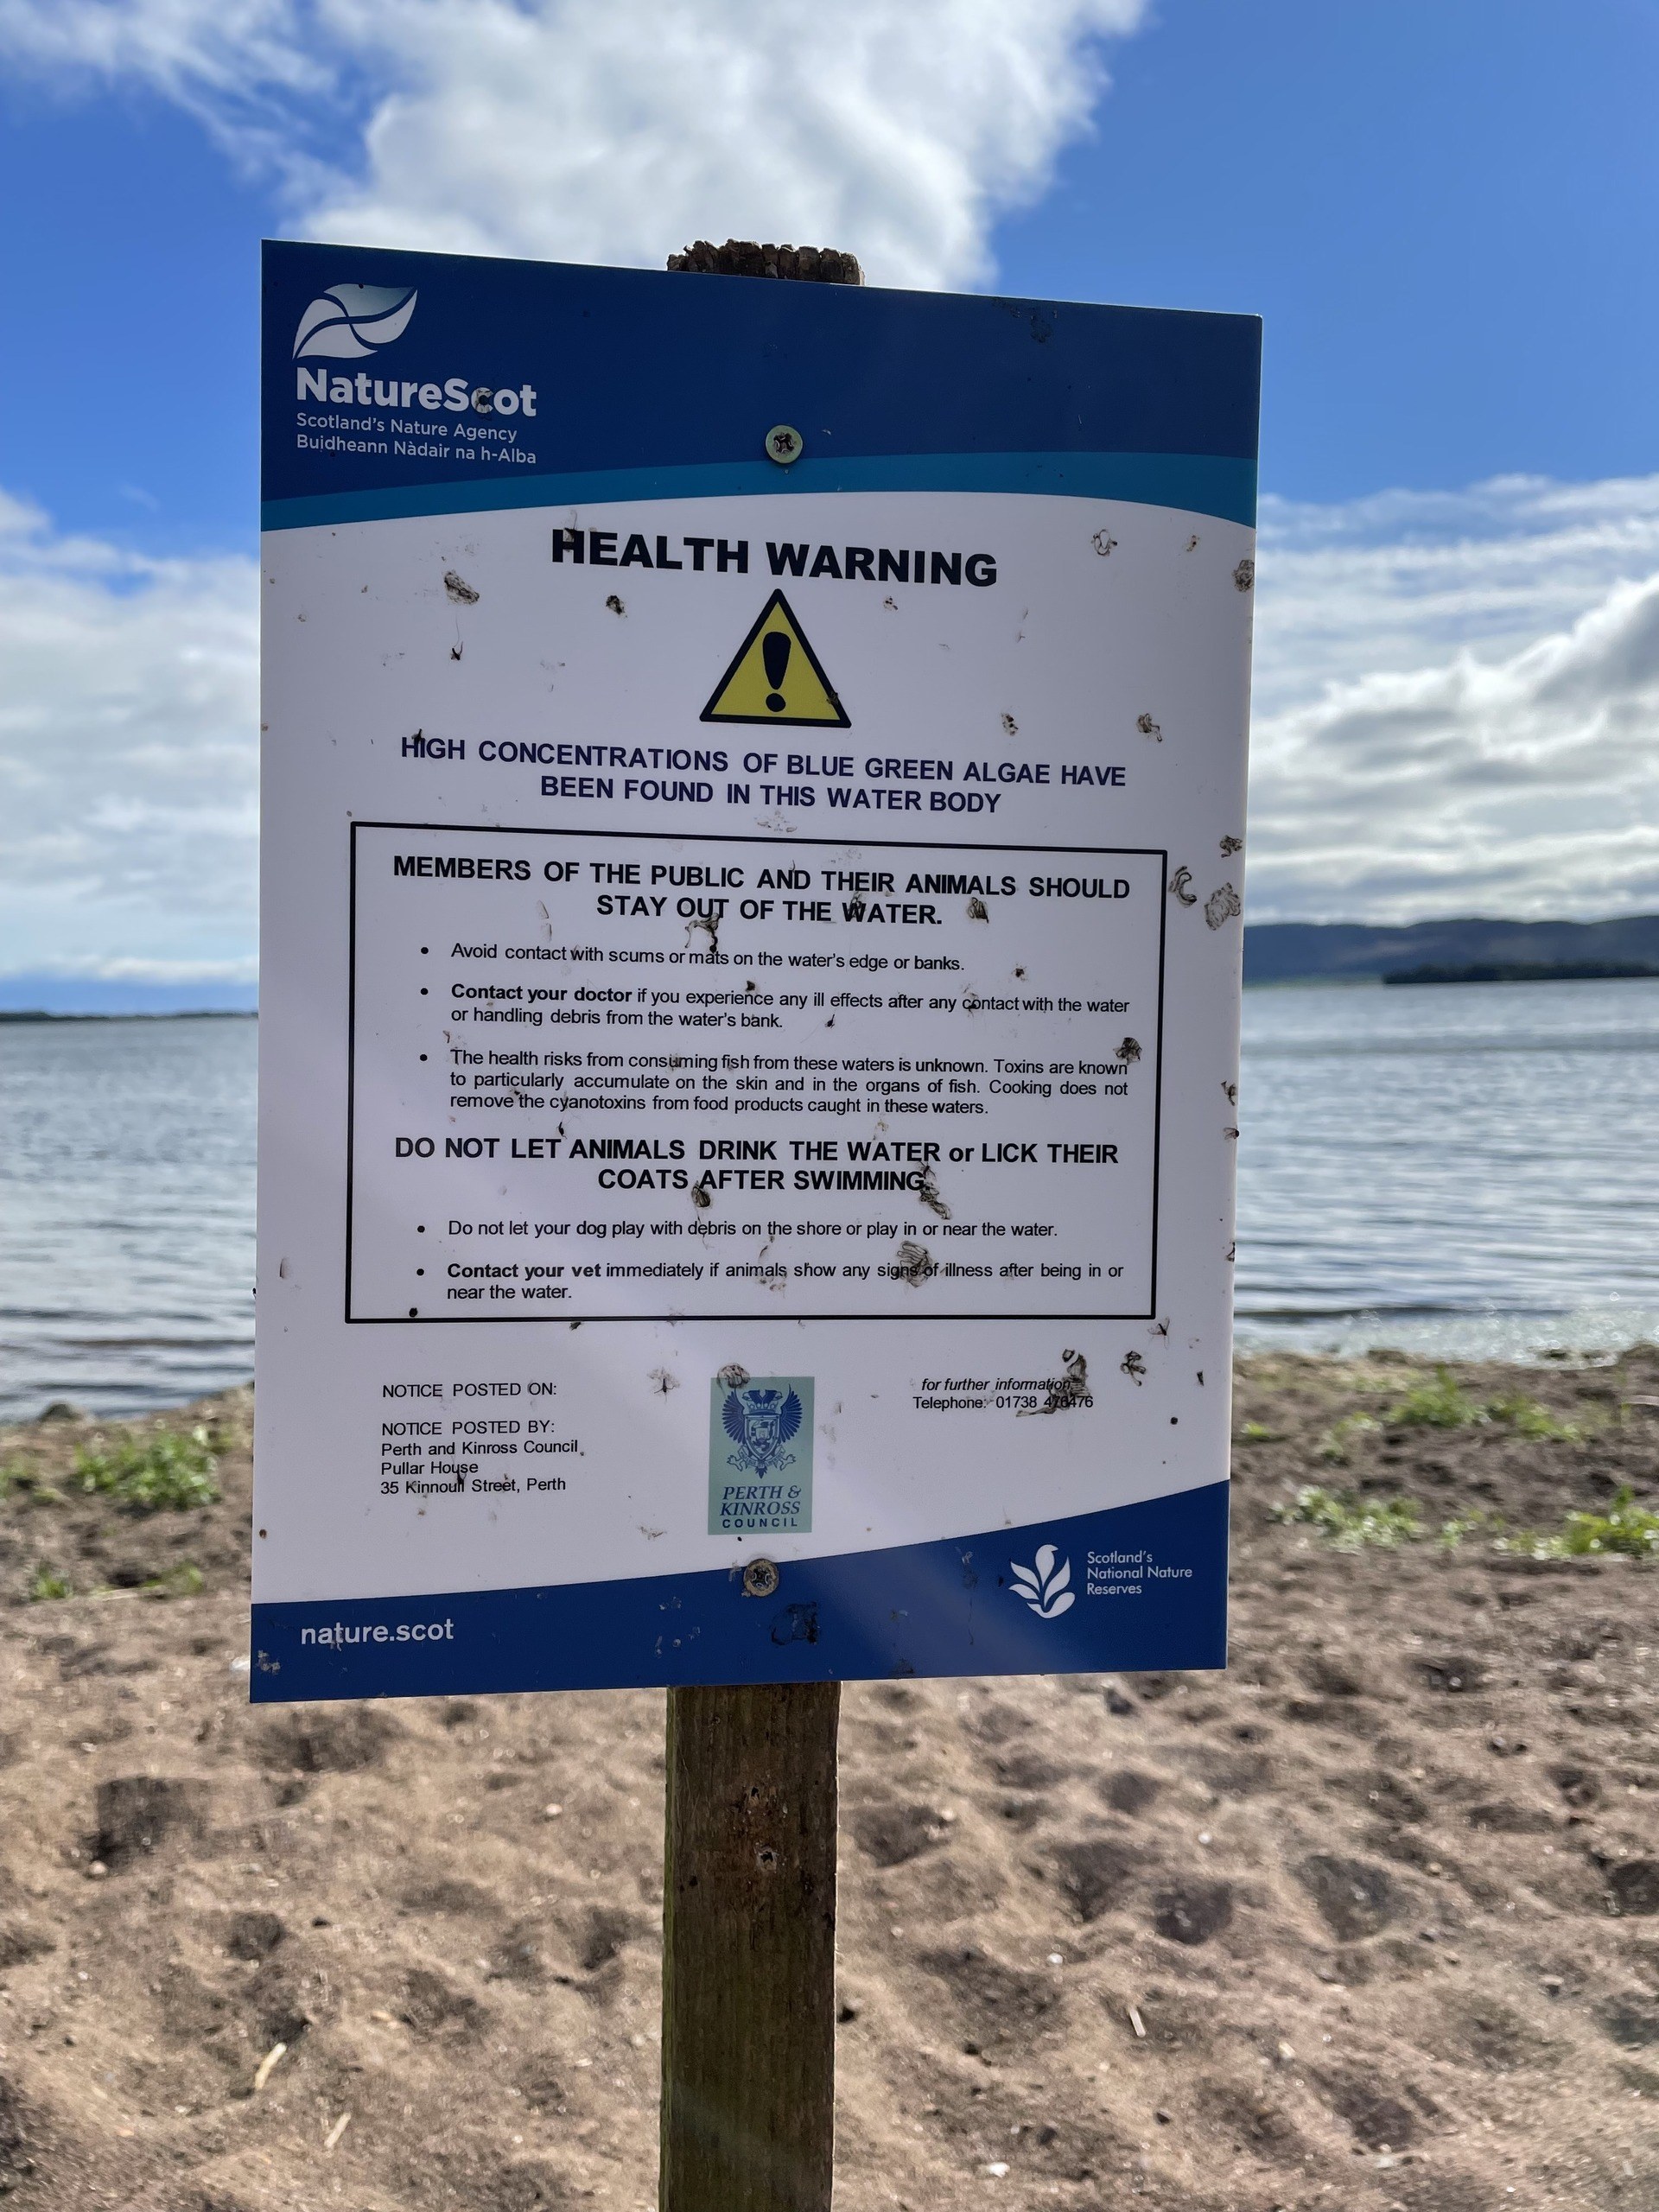 'High concentrations' of blue-green algae have been found in the loch.